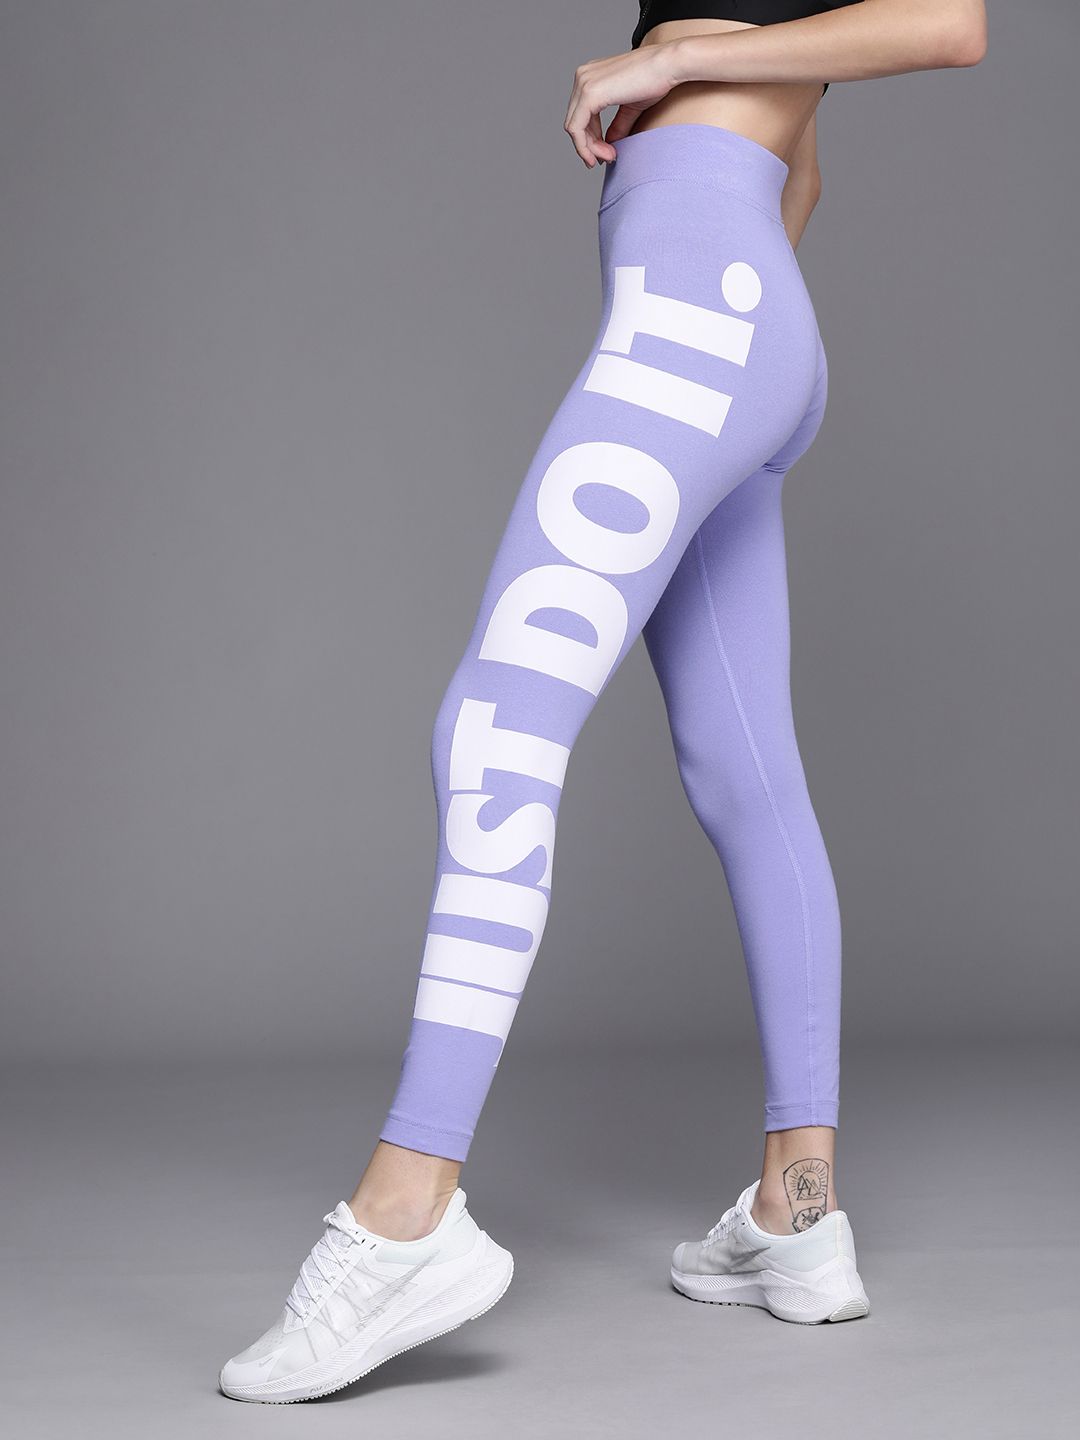 Nike Sportswear Women Lavender Typography Printed Essential High-Waisted Tights Price in India